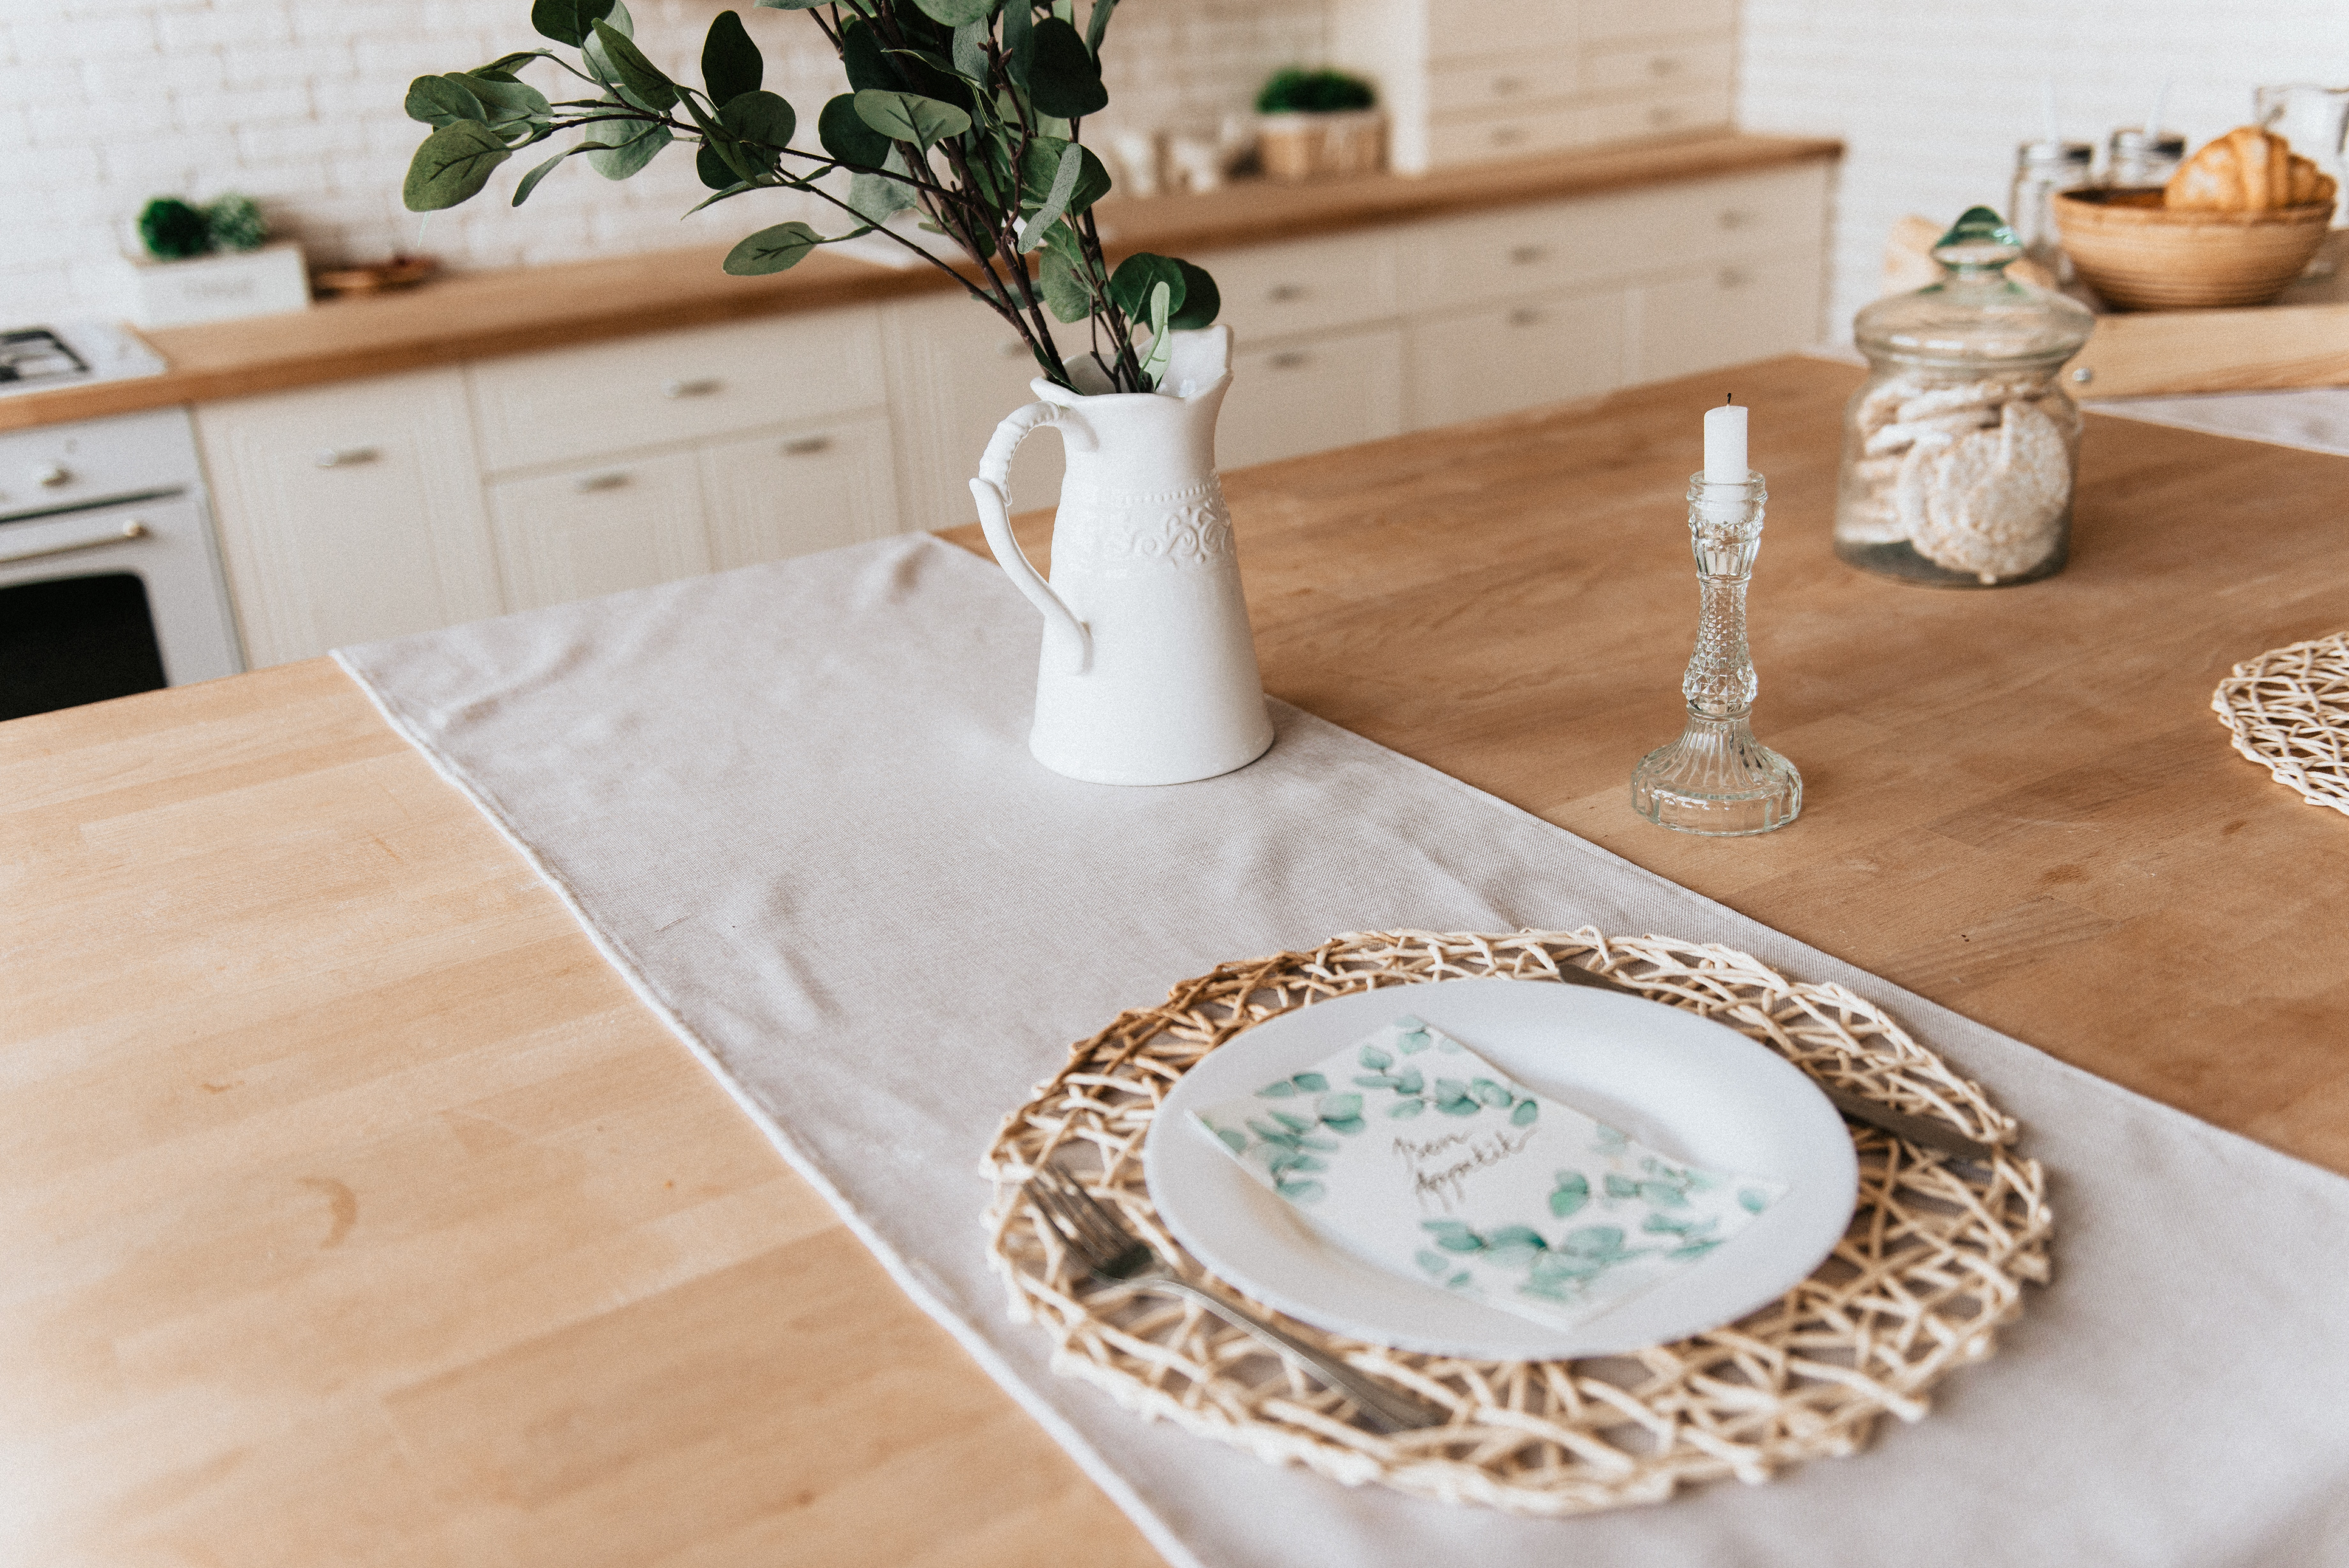 Environment Friendly tips for washing kitchen runners and placemats